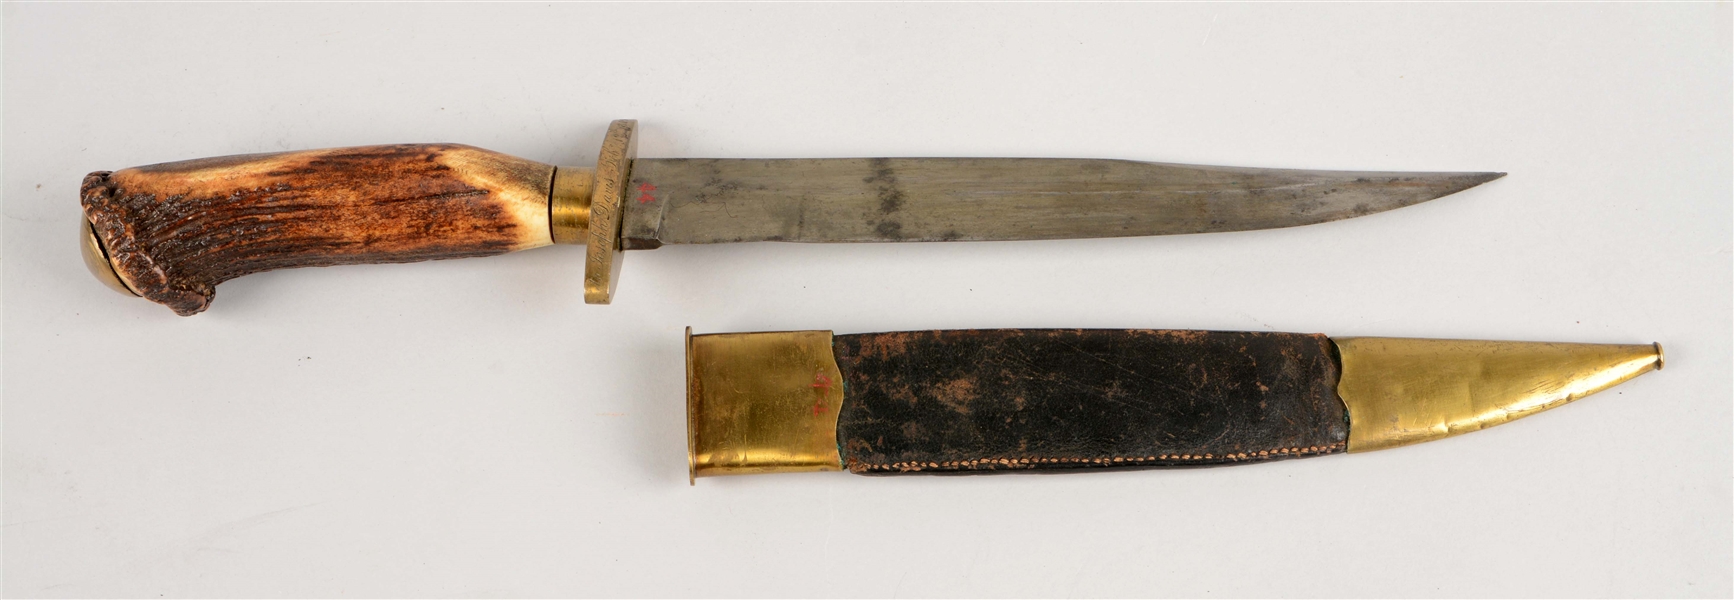 HISTORIC CHEVALIER BOWIE KNIFE PRESENTED BY REZIN BOWIE.